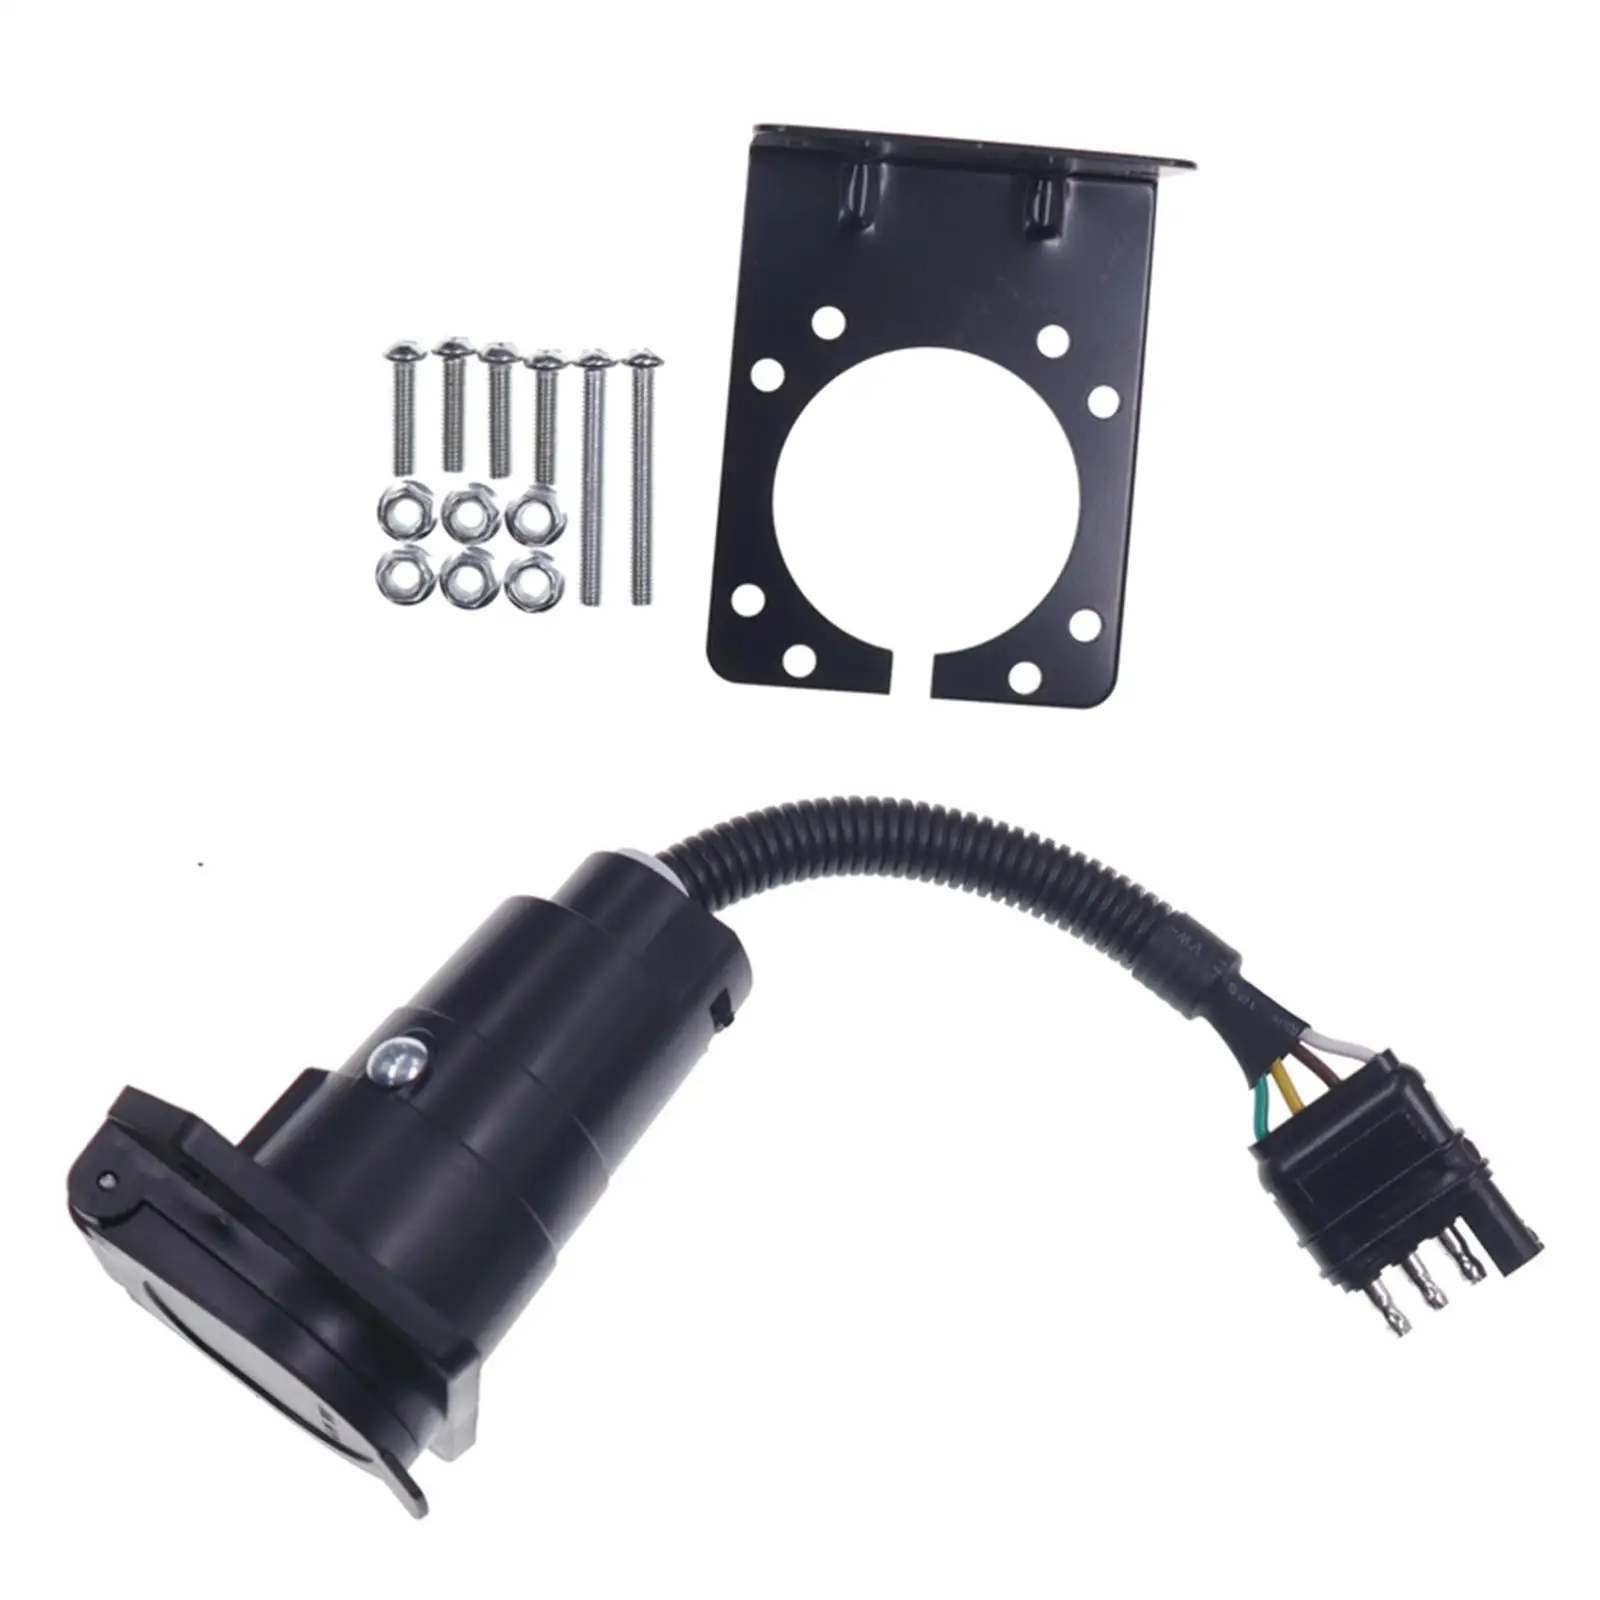 Trailer Adapter Plug 4 Pin to 7 Pin Trailer Connector Cable with Mounting Bracket for Truck Assembly Accessory Replacement